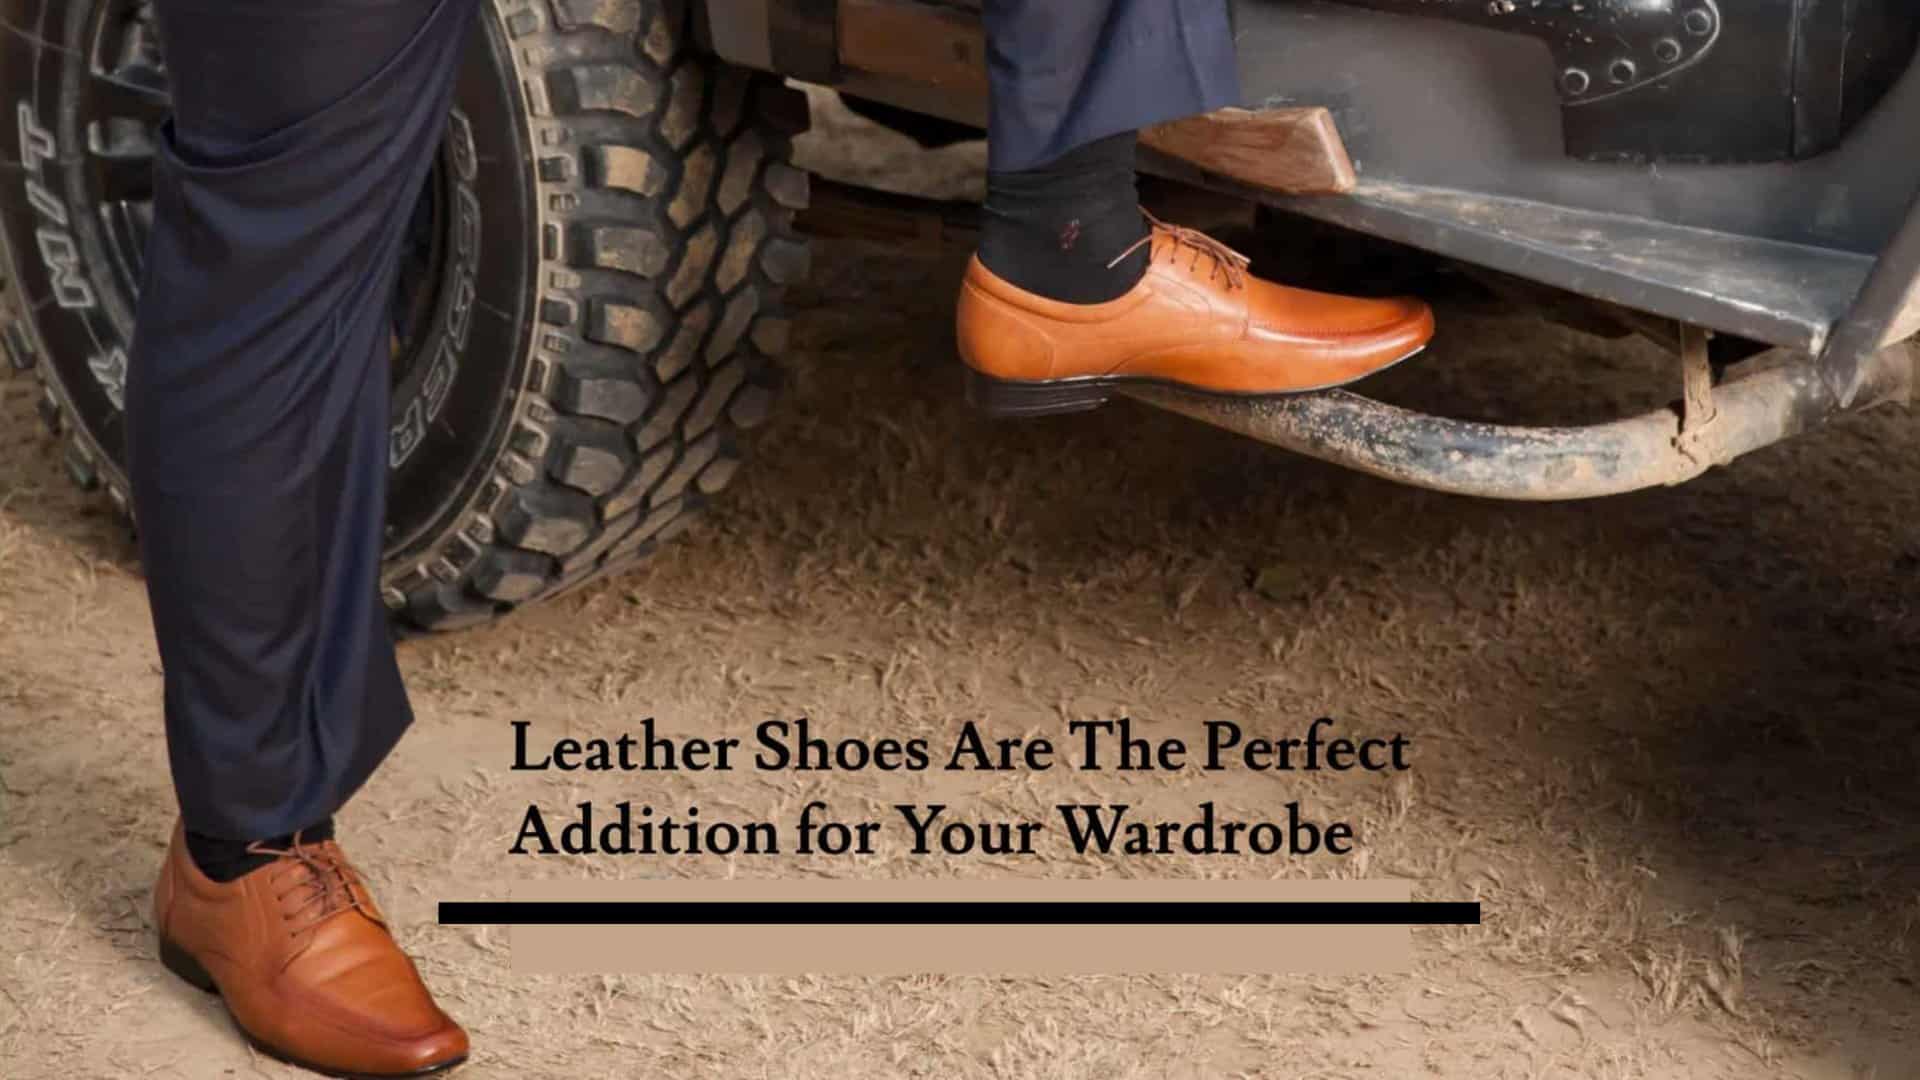 Leather-Shoes-Perfect-Addition-To-Wardrobe